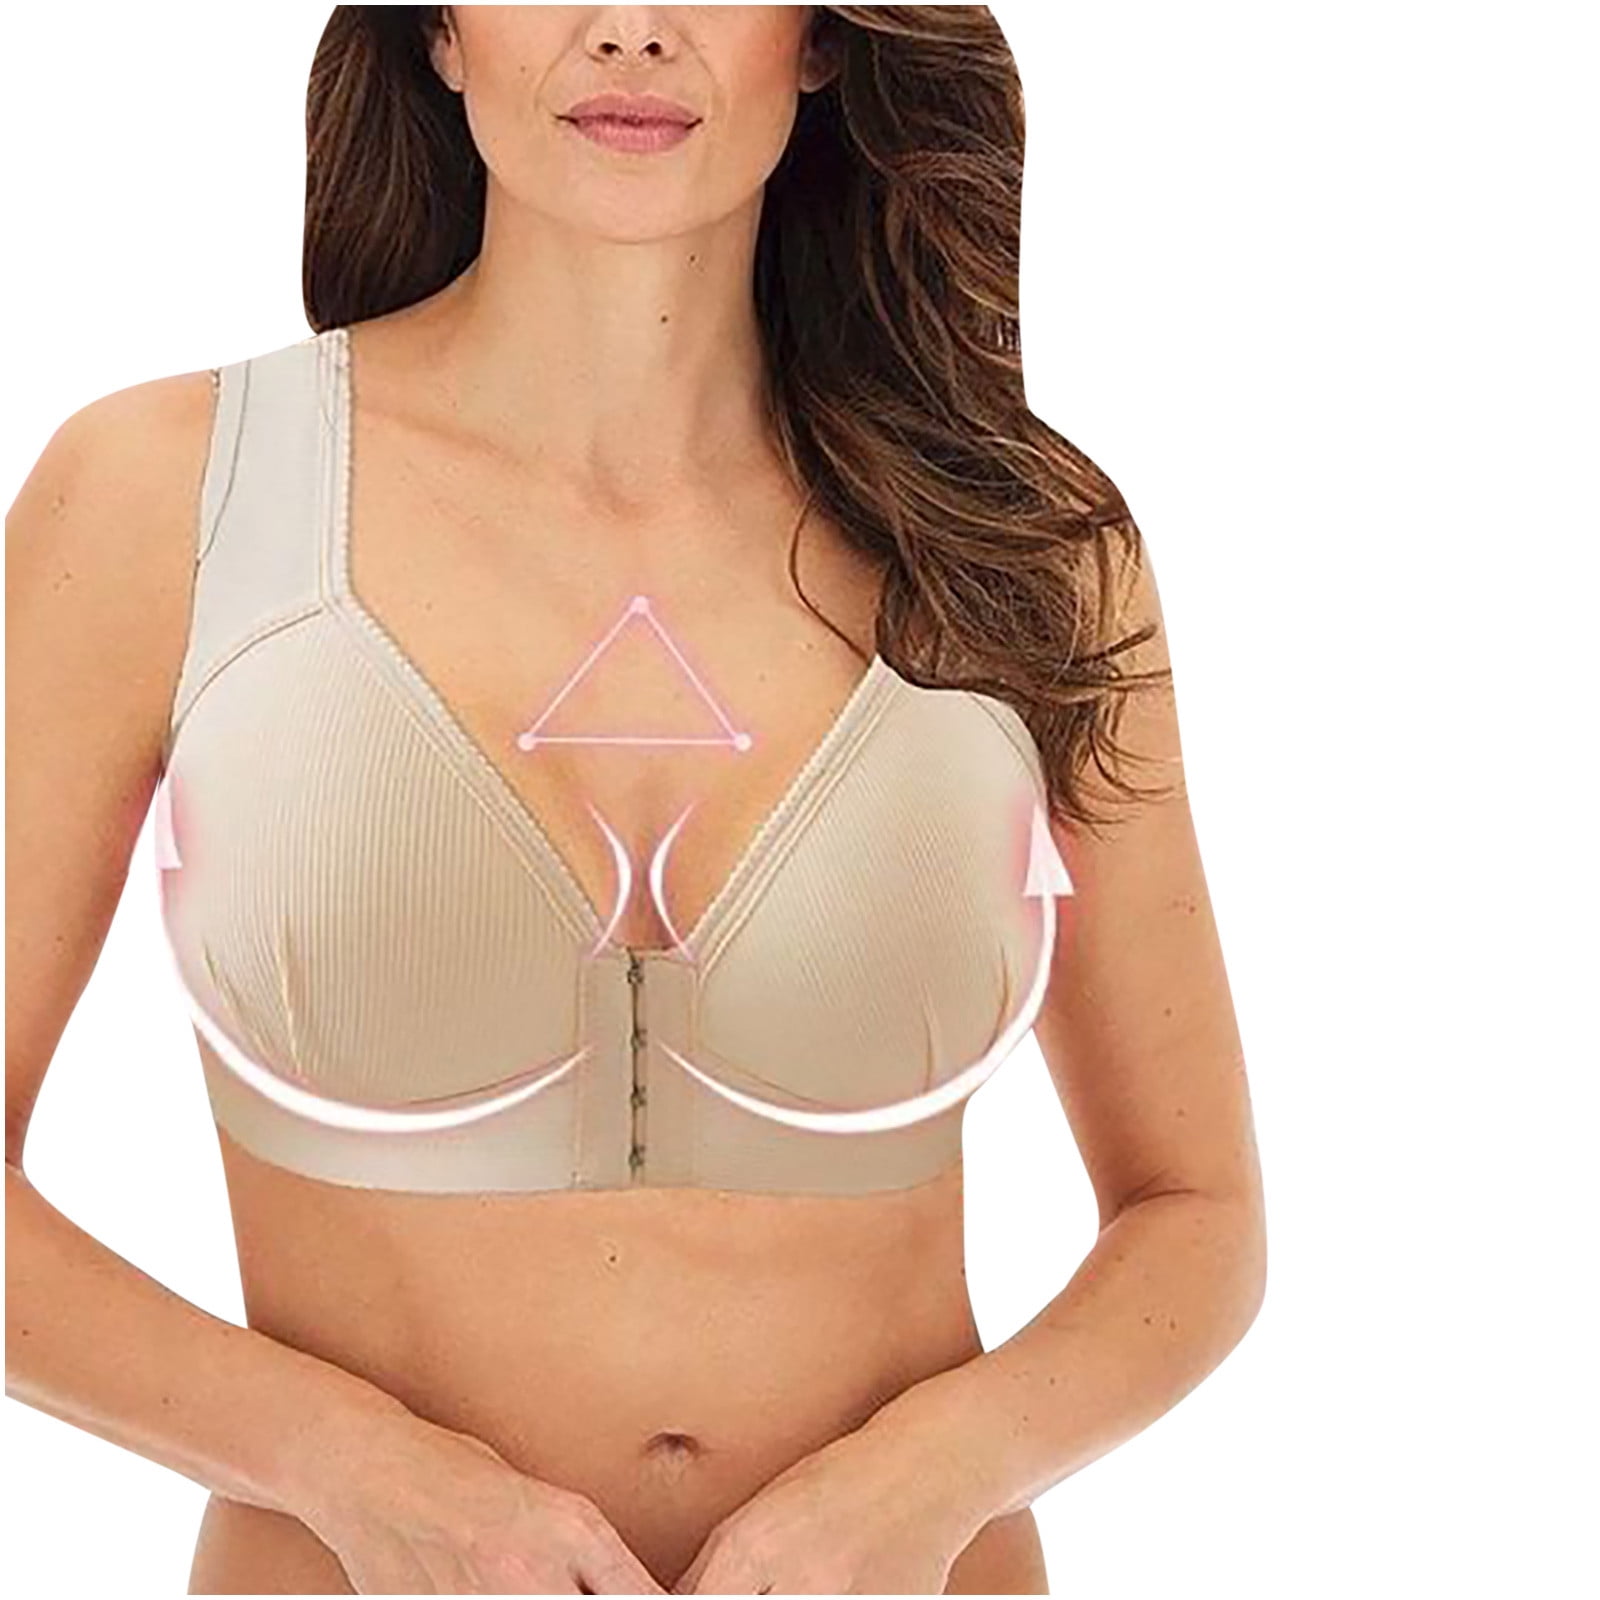 KDDYLITQ Front Button Bra for Elderly Plus Size Padded Push Up